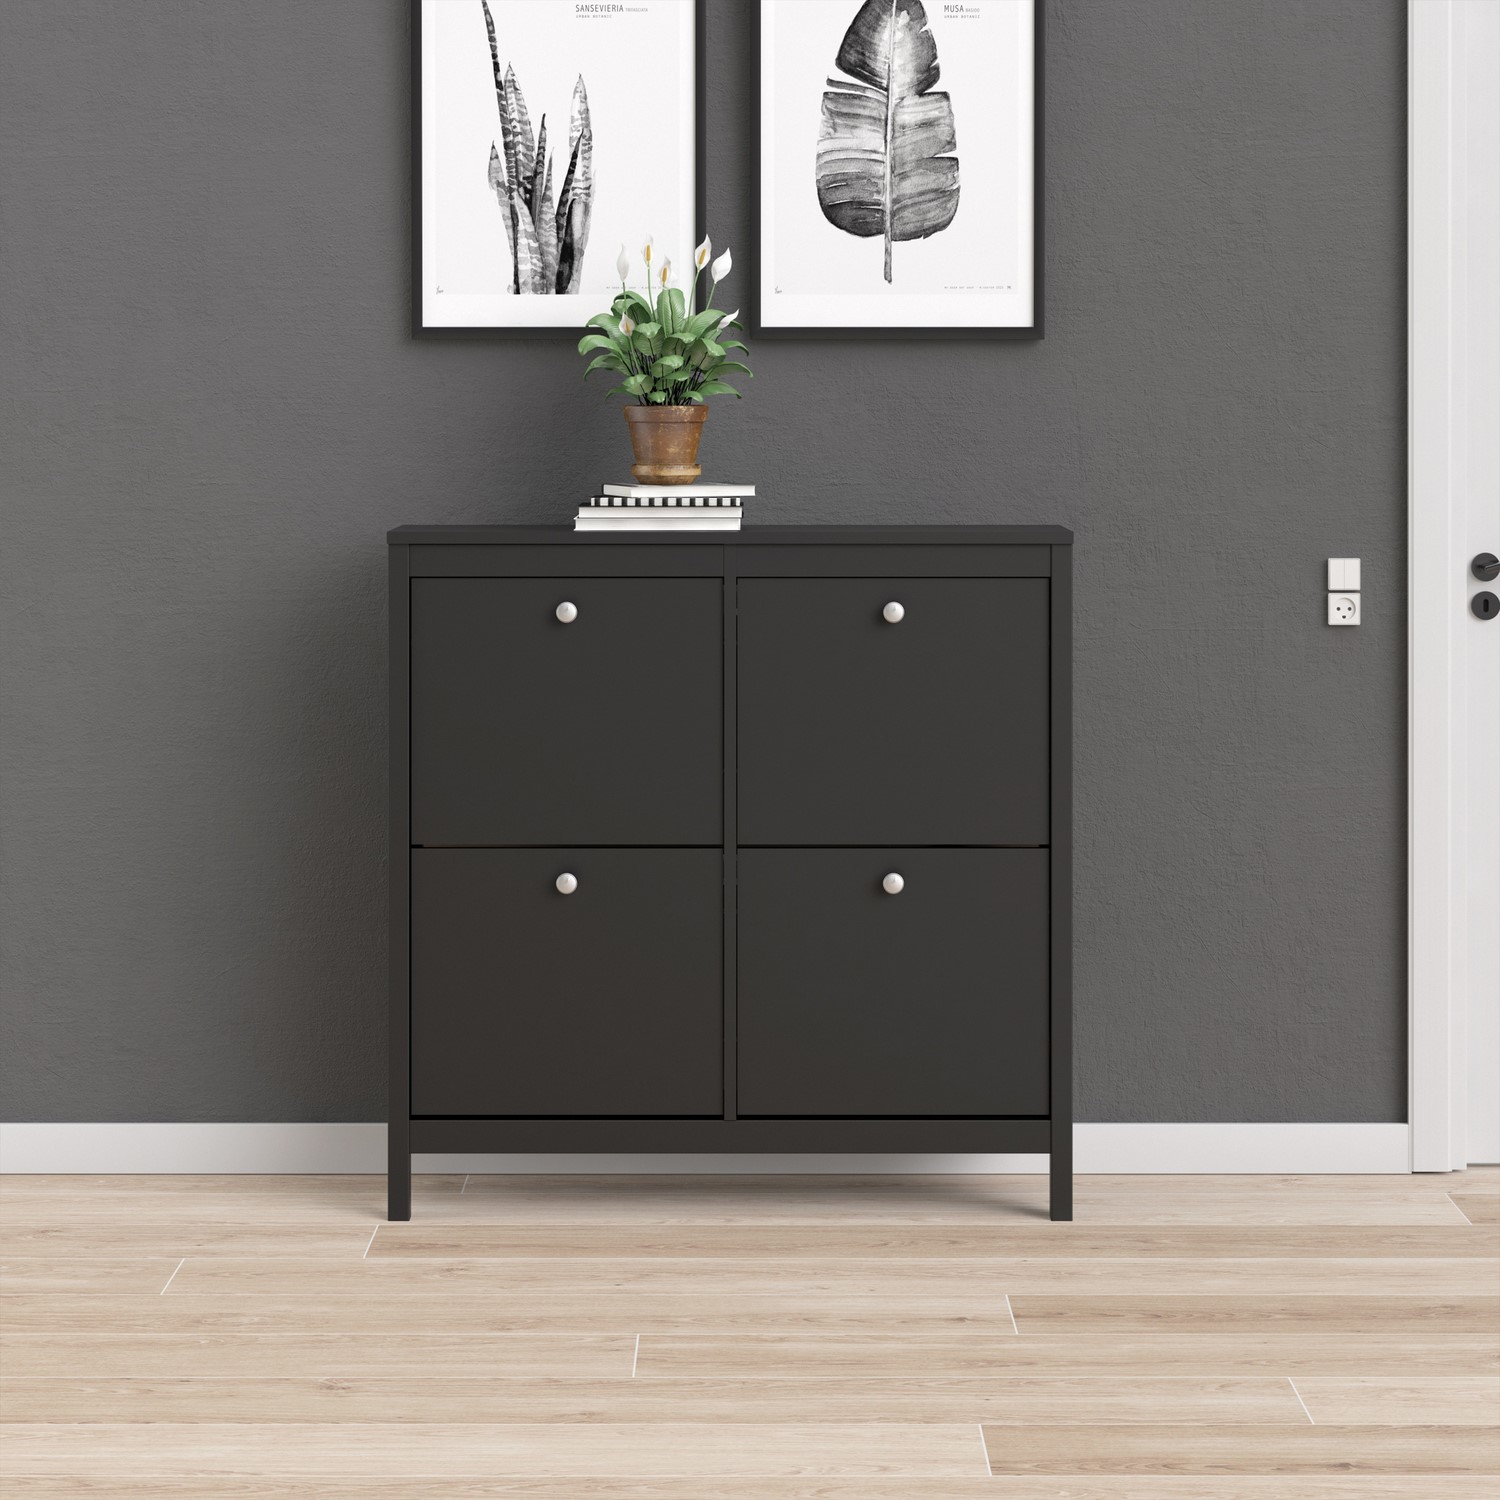 Photo of Black shoe cabinet with 4 cabinets - madrid